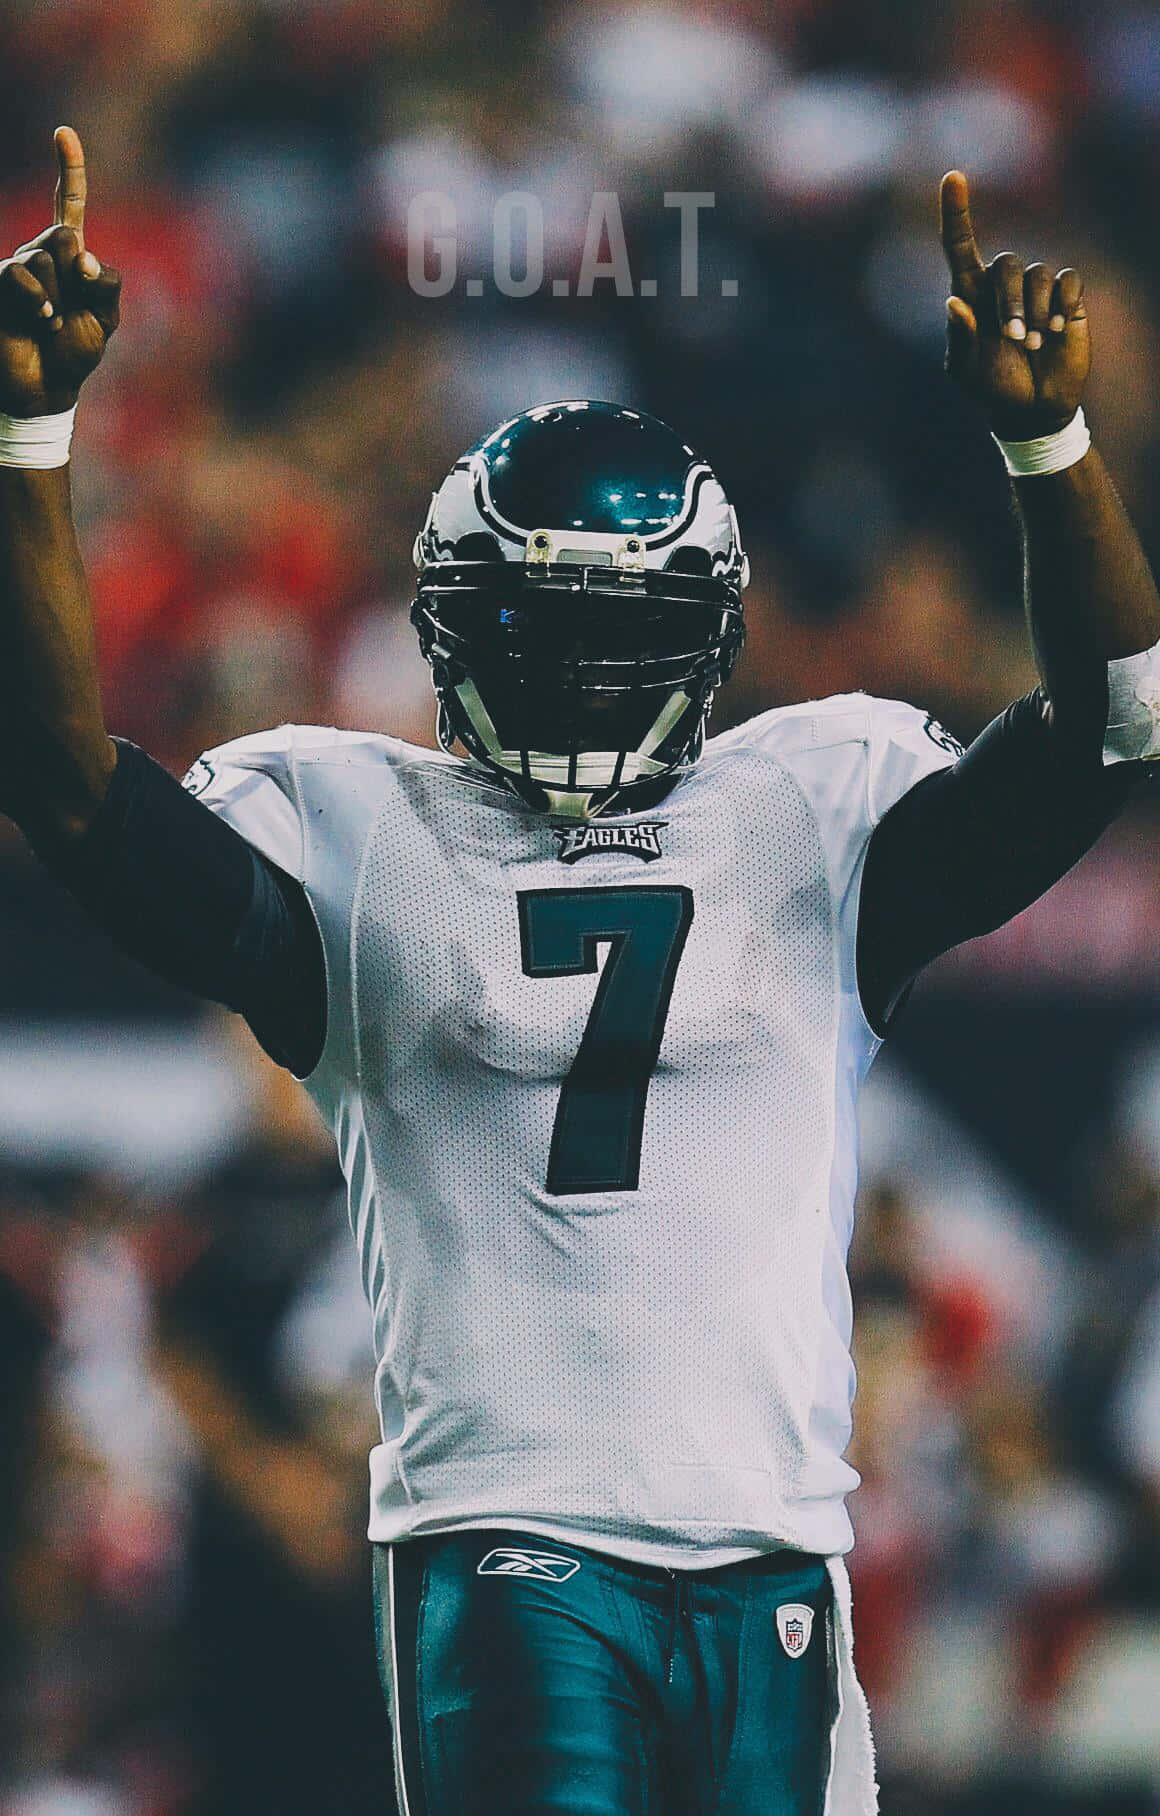 Michael Vick drops back after the snap to throw a pass. Wallpaper